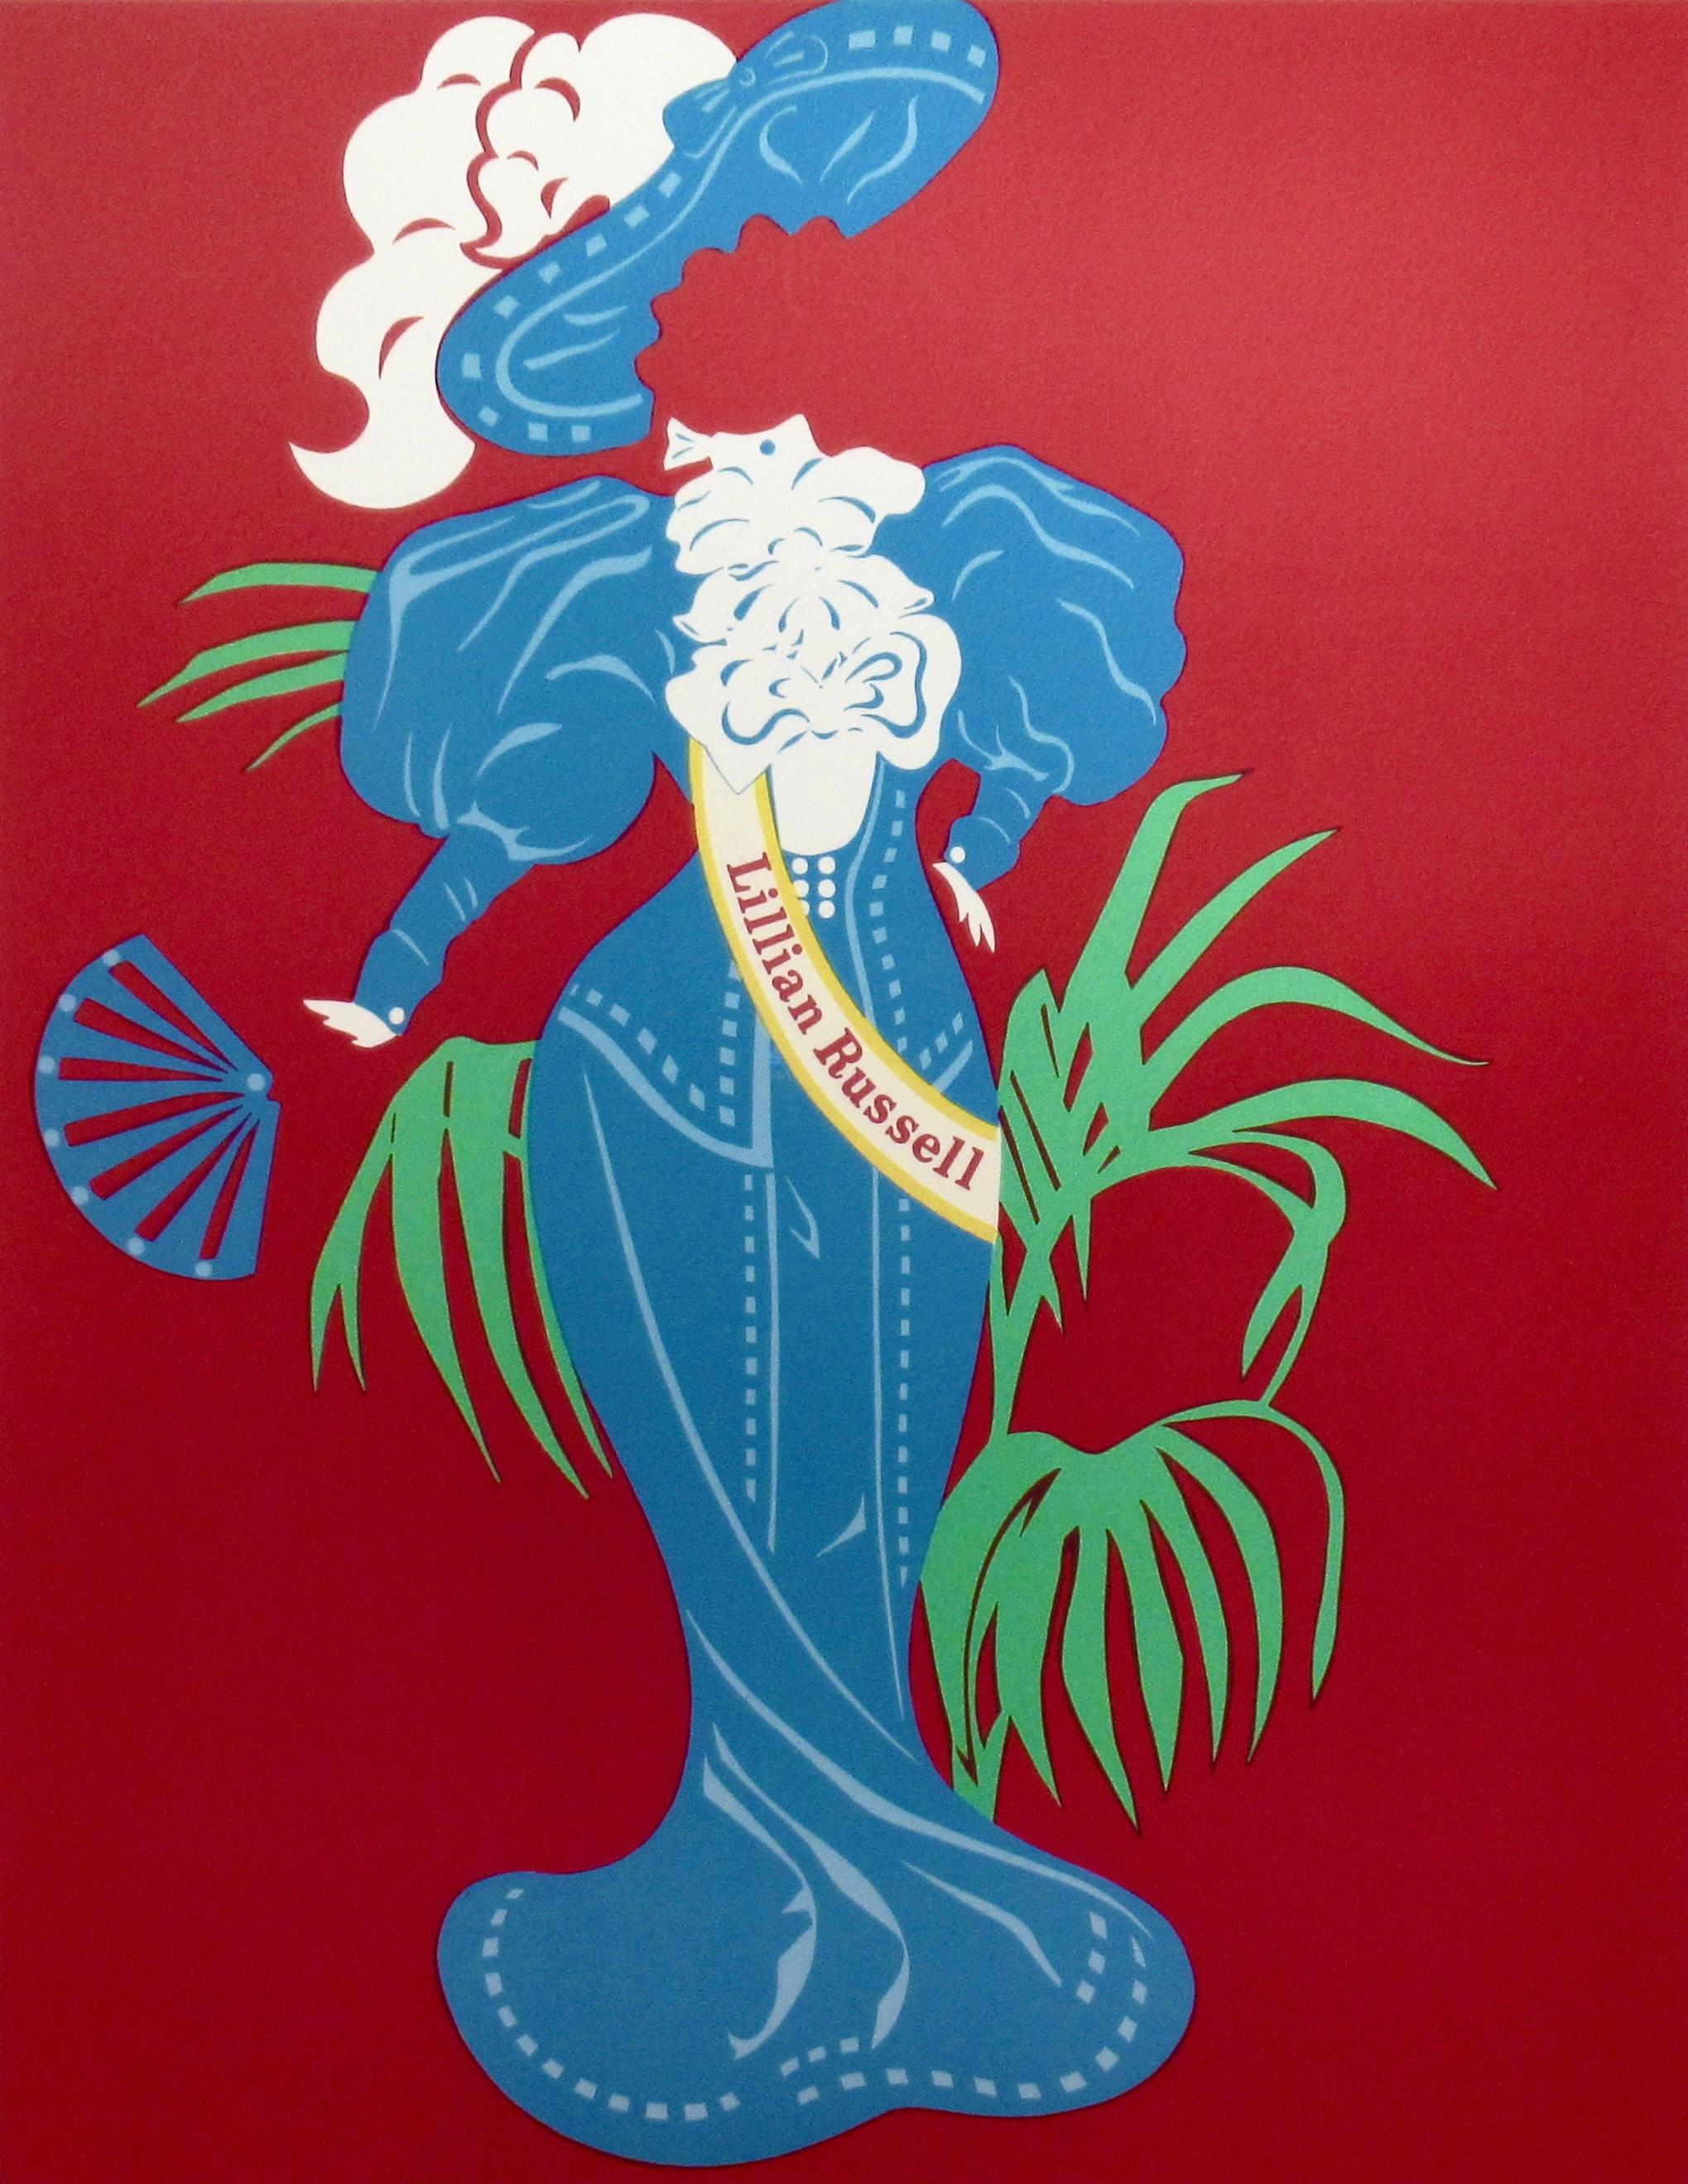 Lillian Russell - Print by Robert Indiana